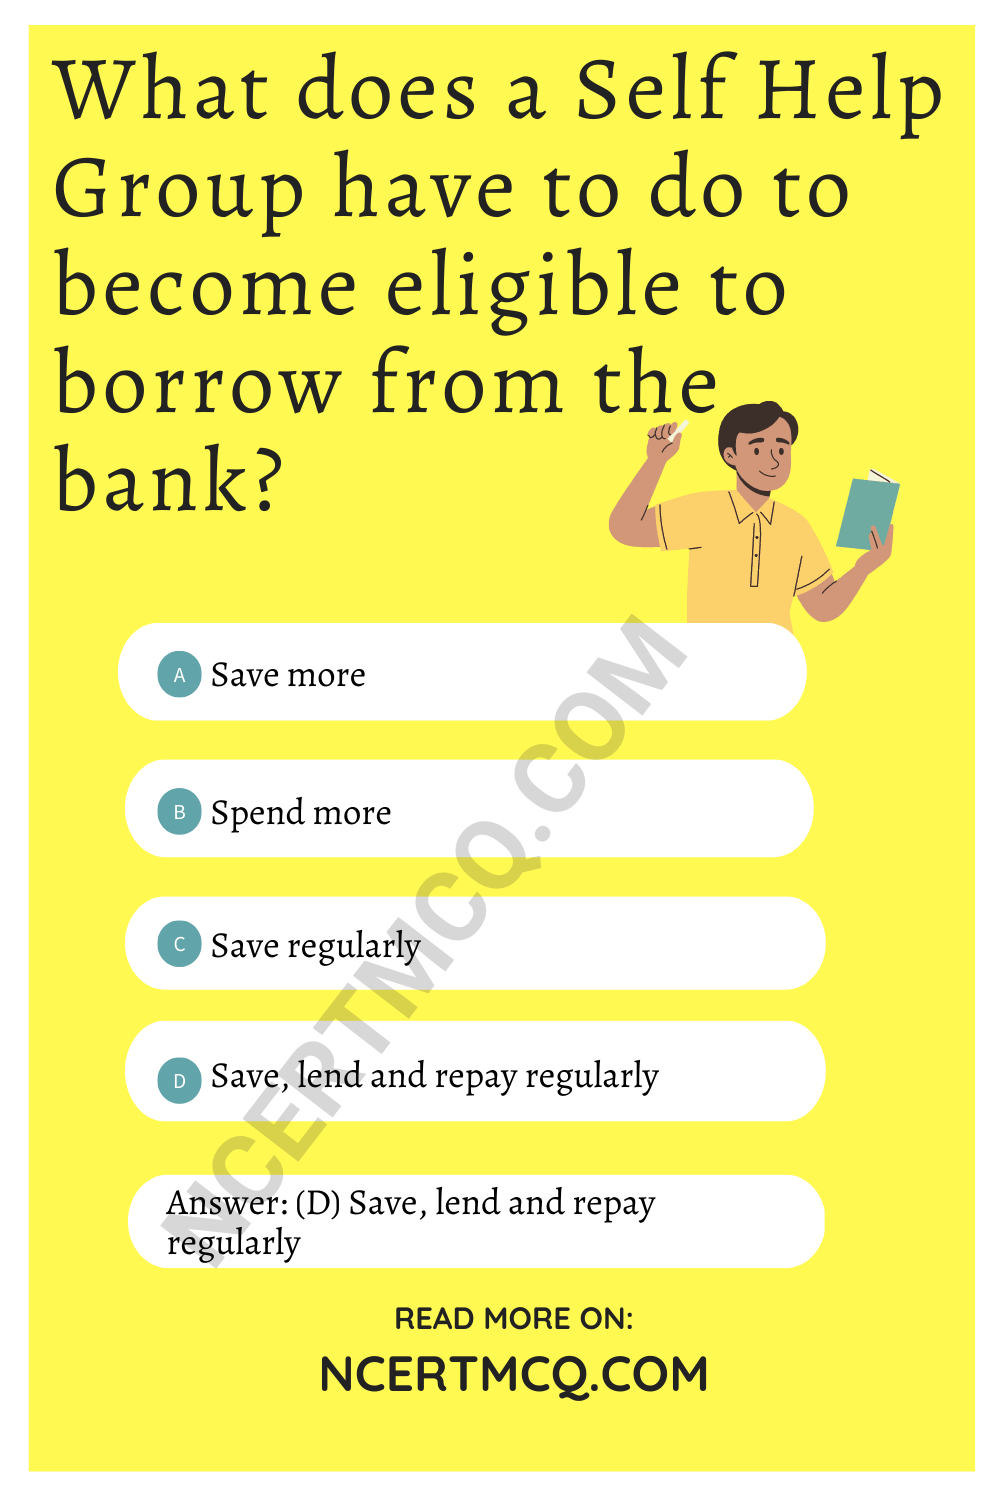 What does a Self Help Group have to do to become eligible to borrow from the bank?